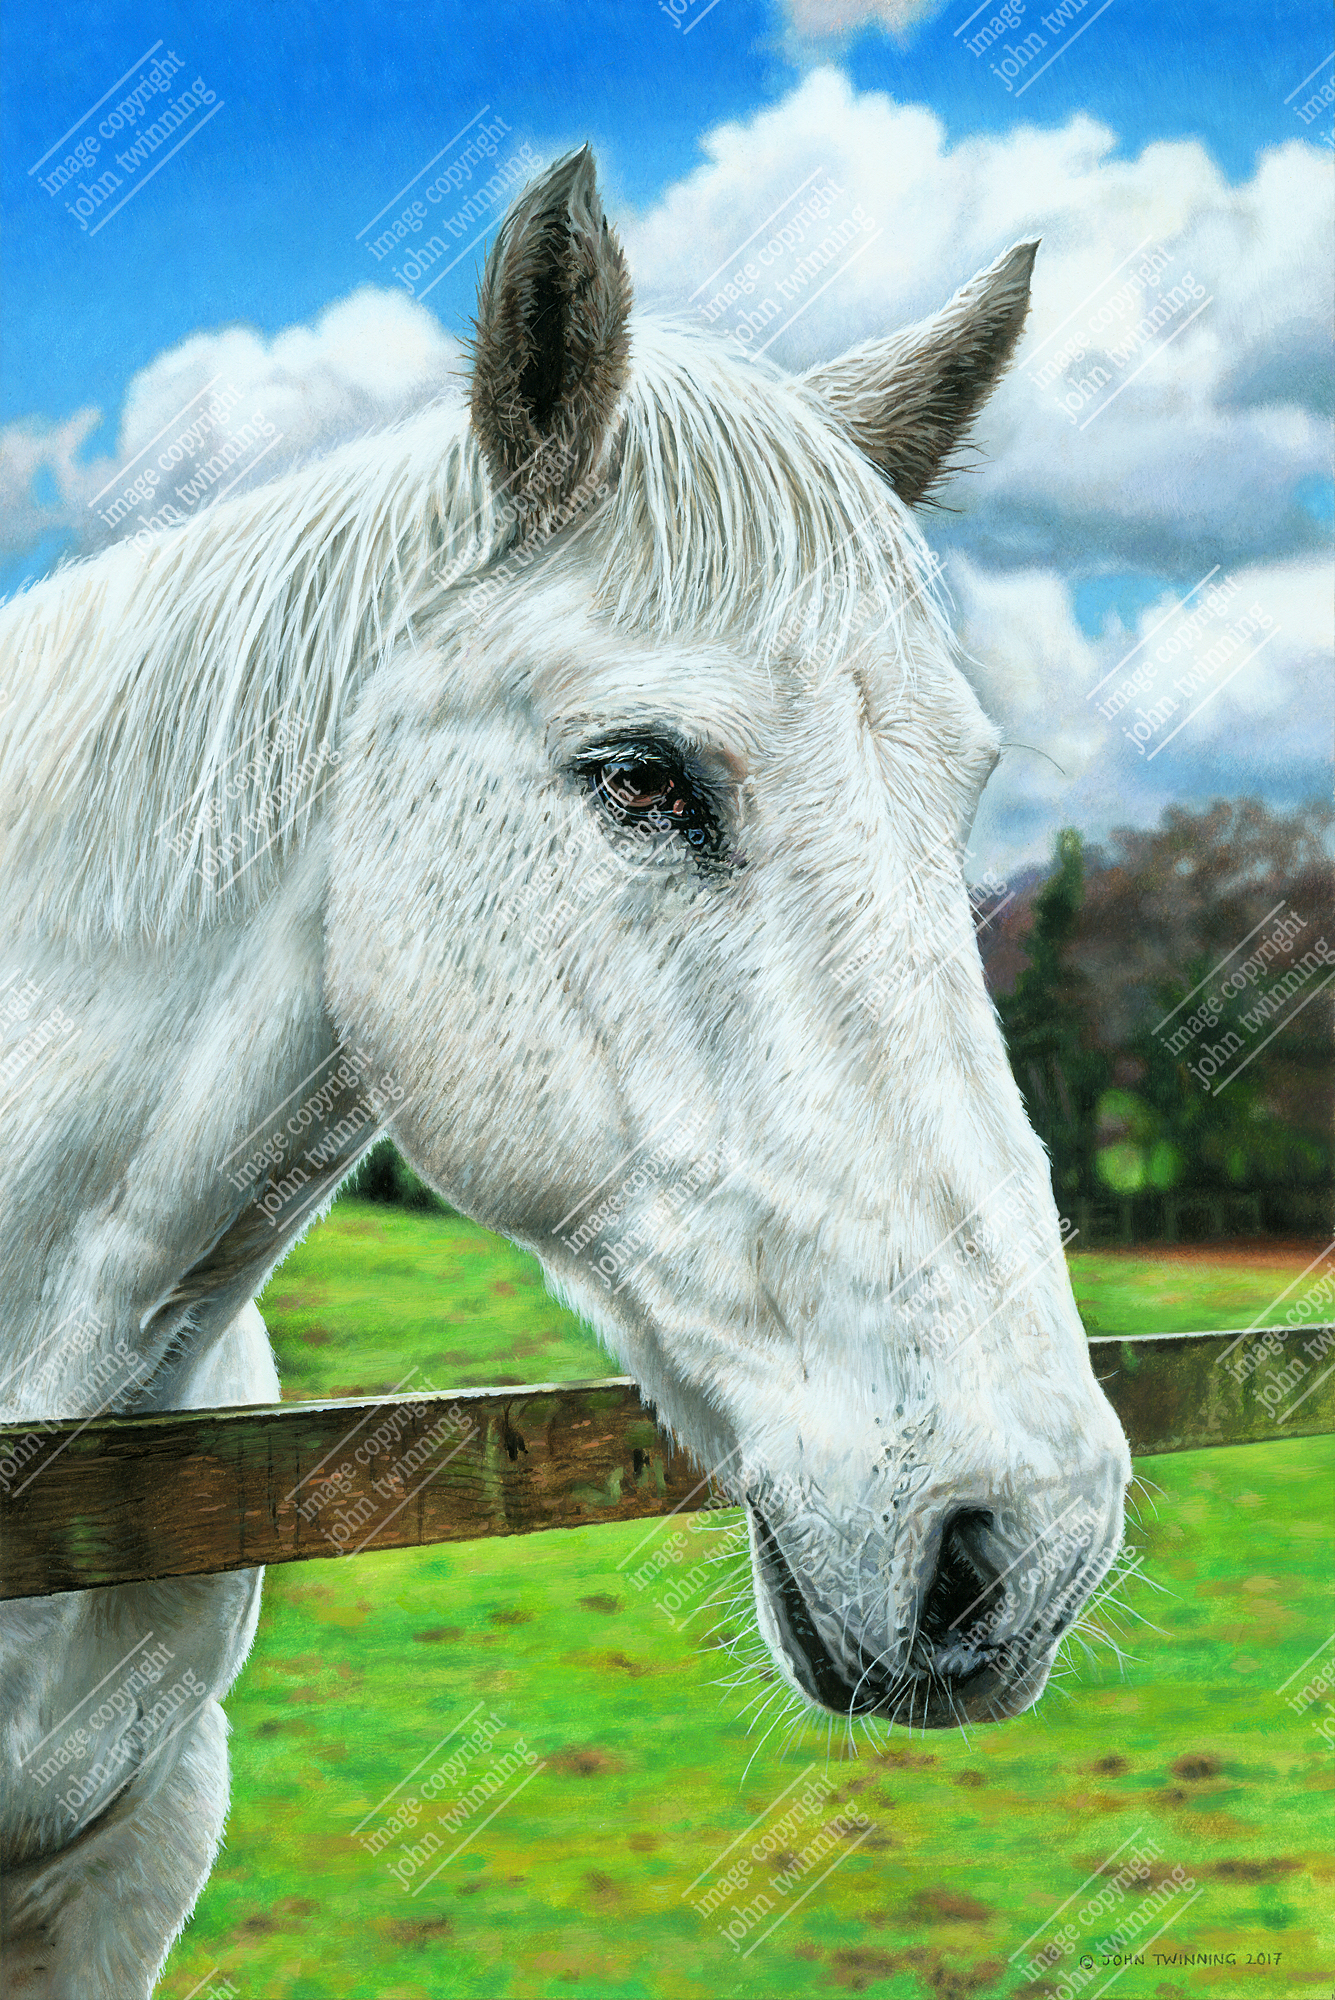 'Gina' - art print from an equestrian pet portrait painting of a grey mare